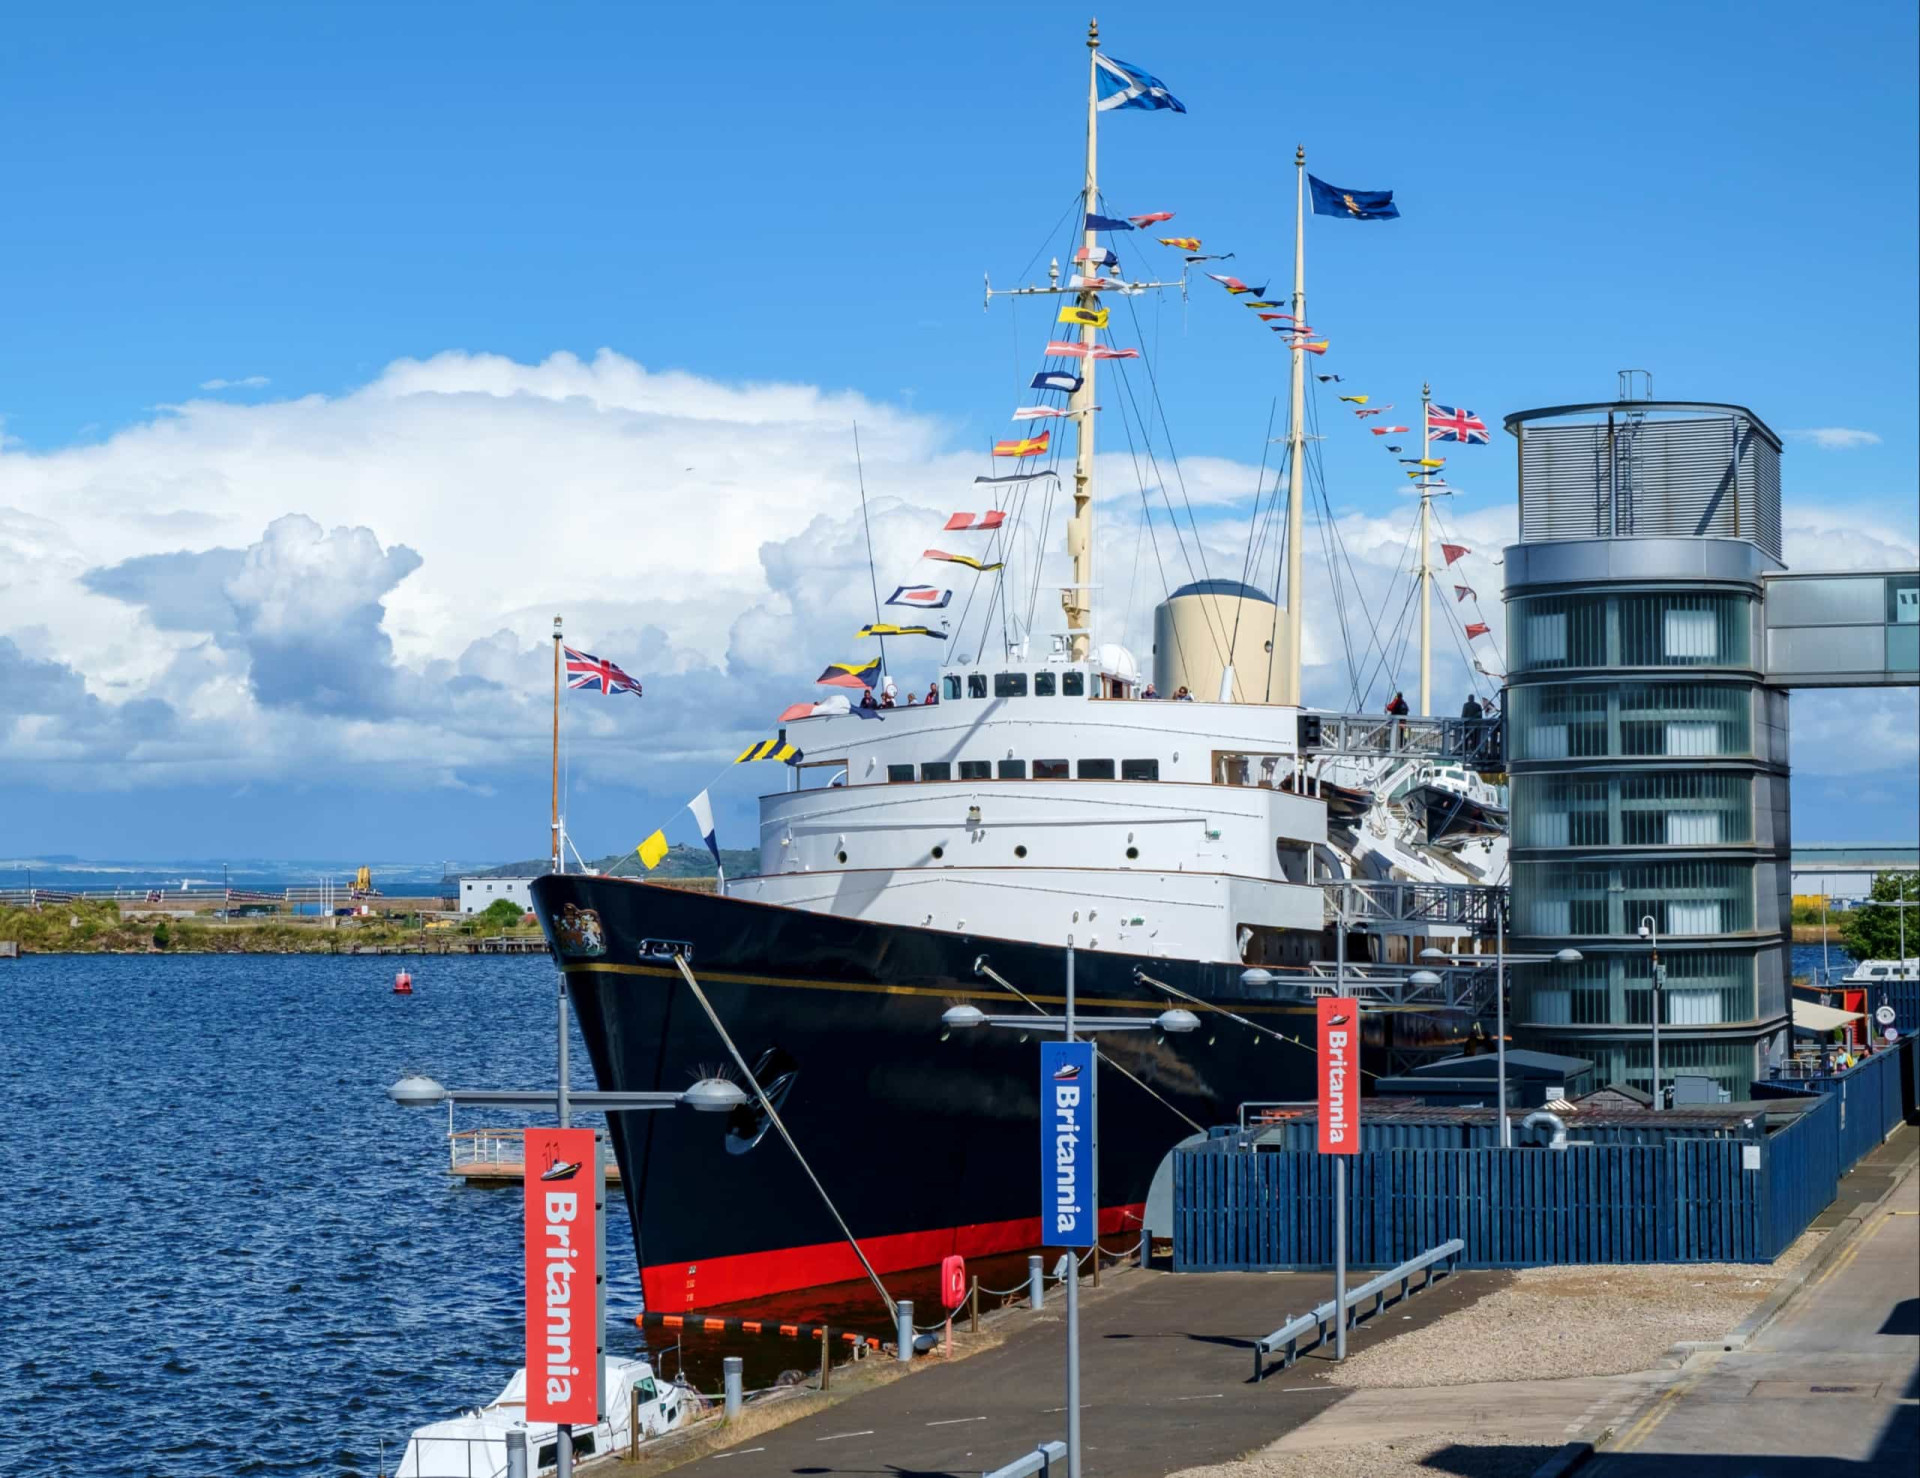 <p>HMY <em>Britannia</em> sailed to Scotland and began a new role as a visitor attraction moored in the historic Port of Leith in Edinburgh.</p>